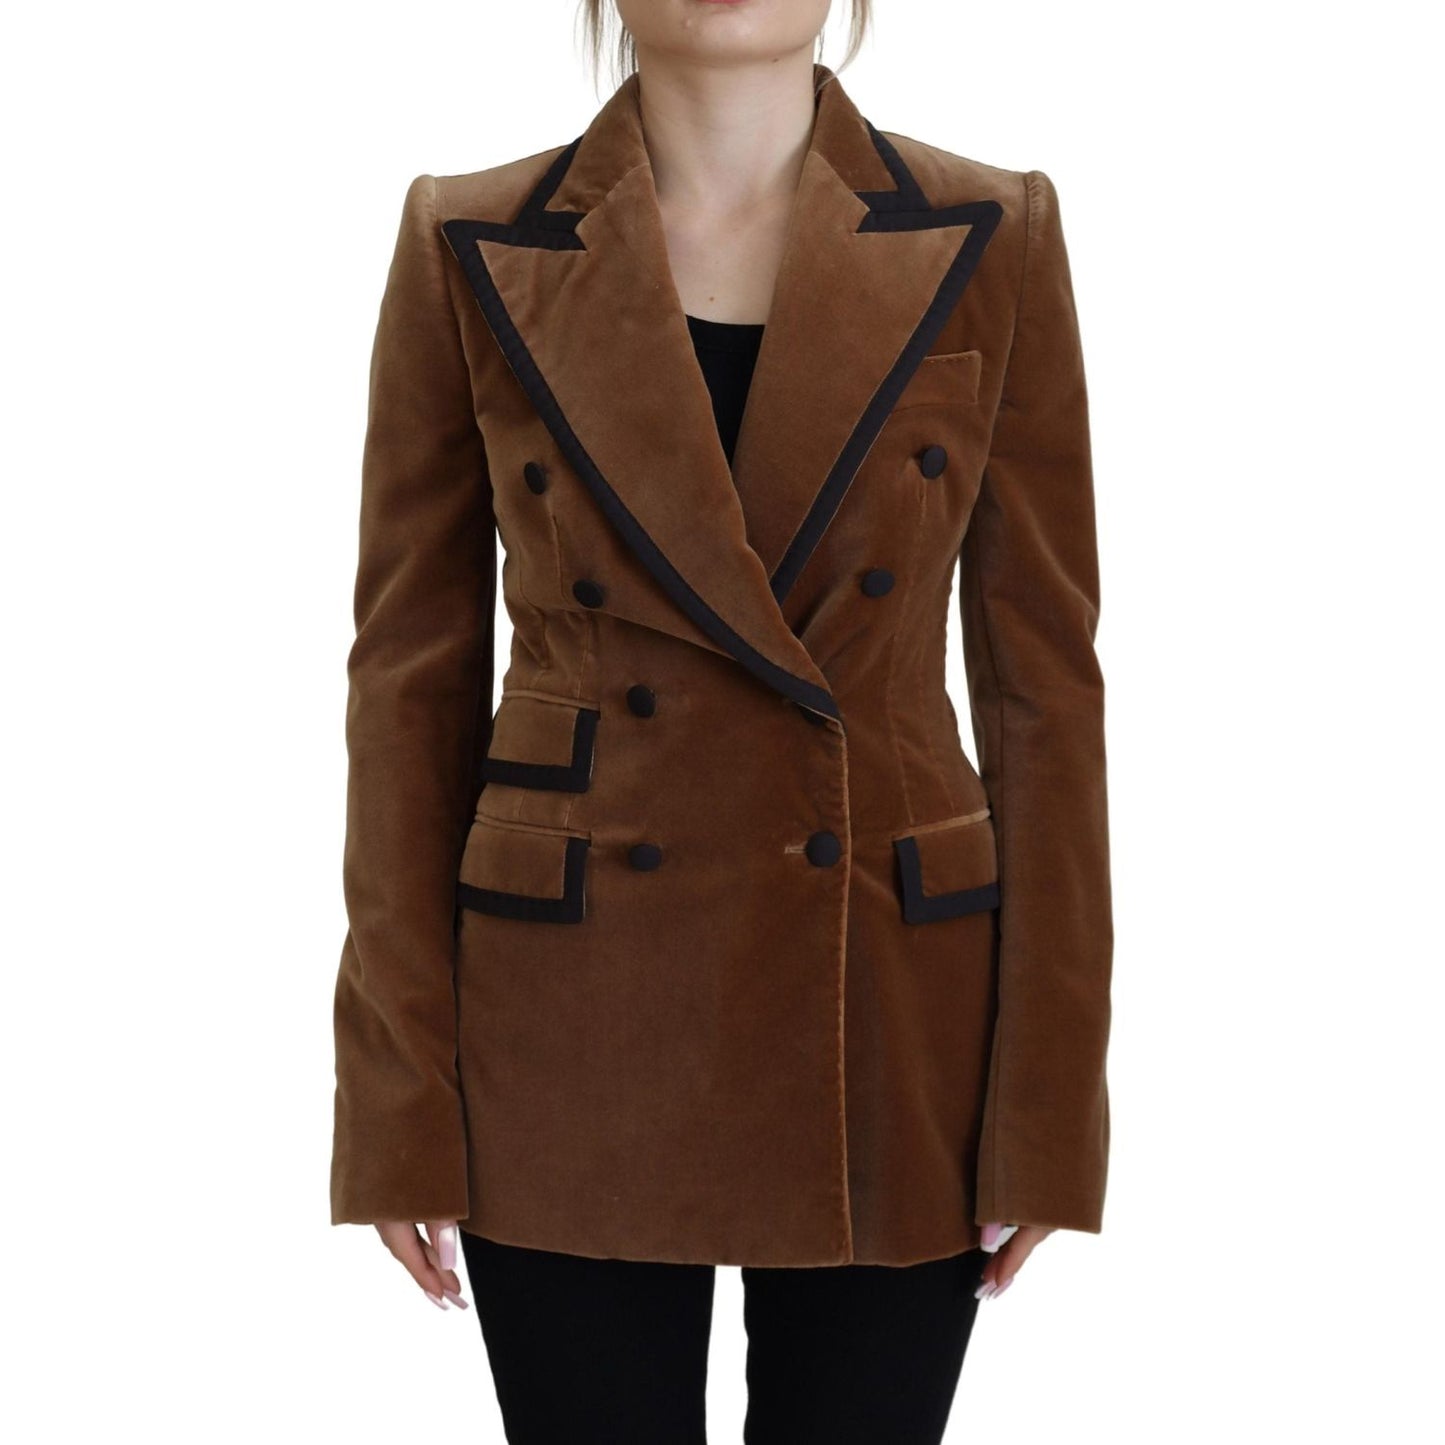 Dolce & Gabbana Elegant Double Breasted Brown Blazer Jacket brown-double-breasted-blazer-cotton-jacket